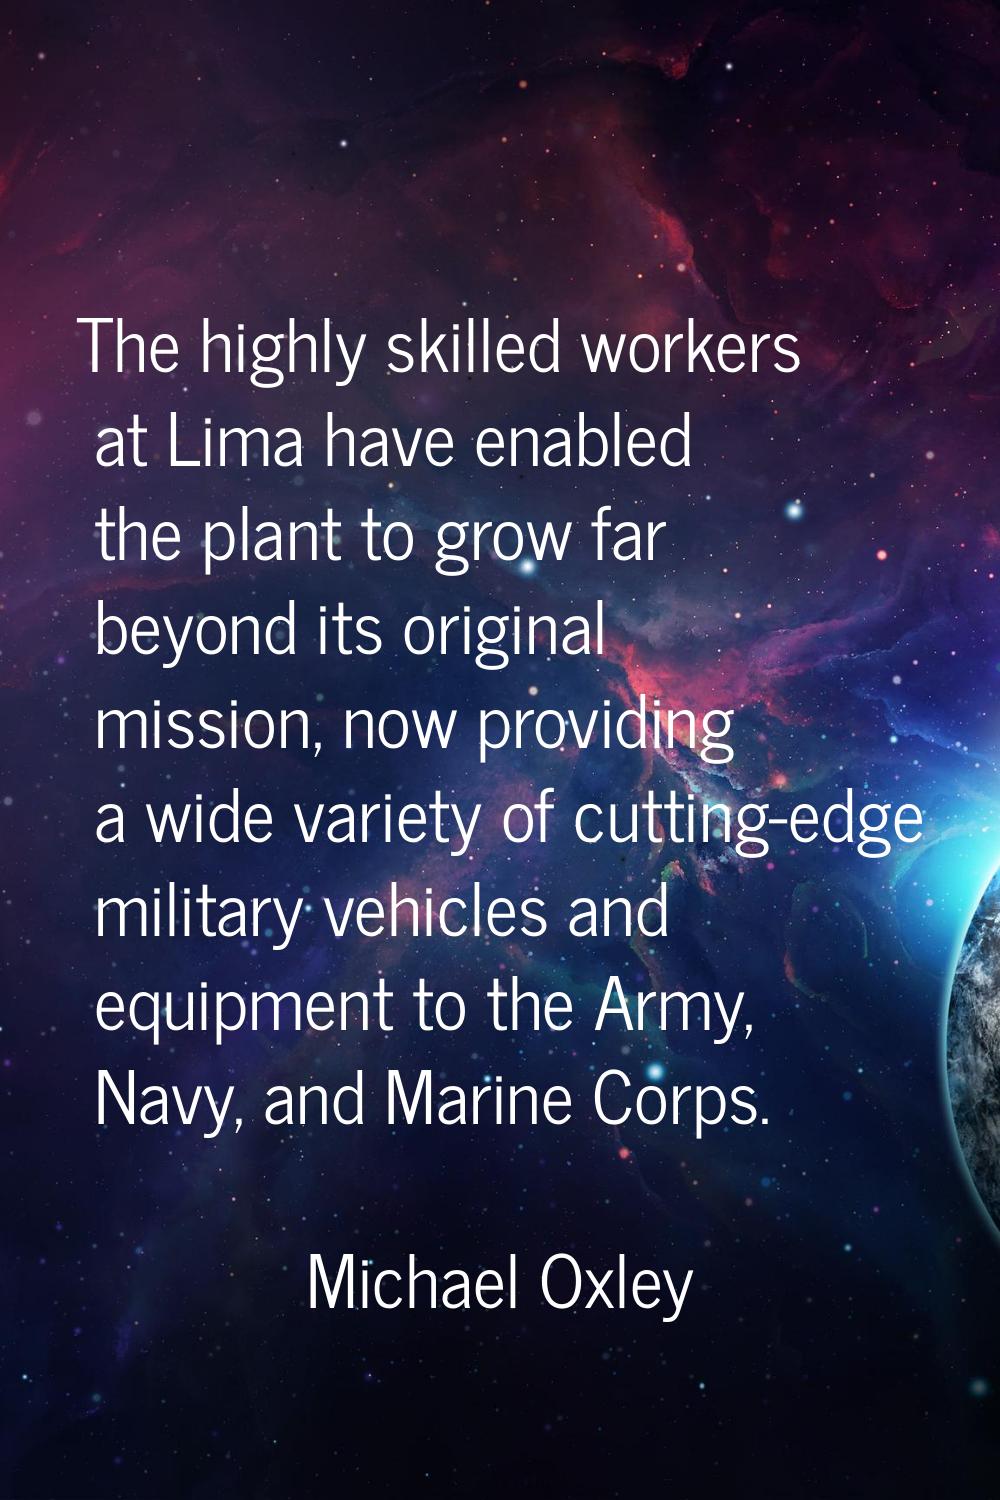 The highly skilled workers at Lima have enabled the plant to grow far beyond its original mission, 